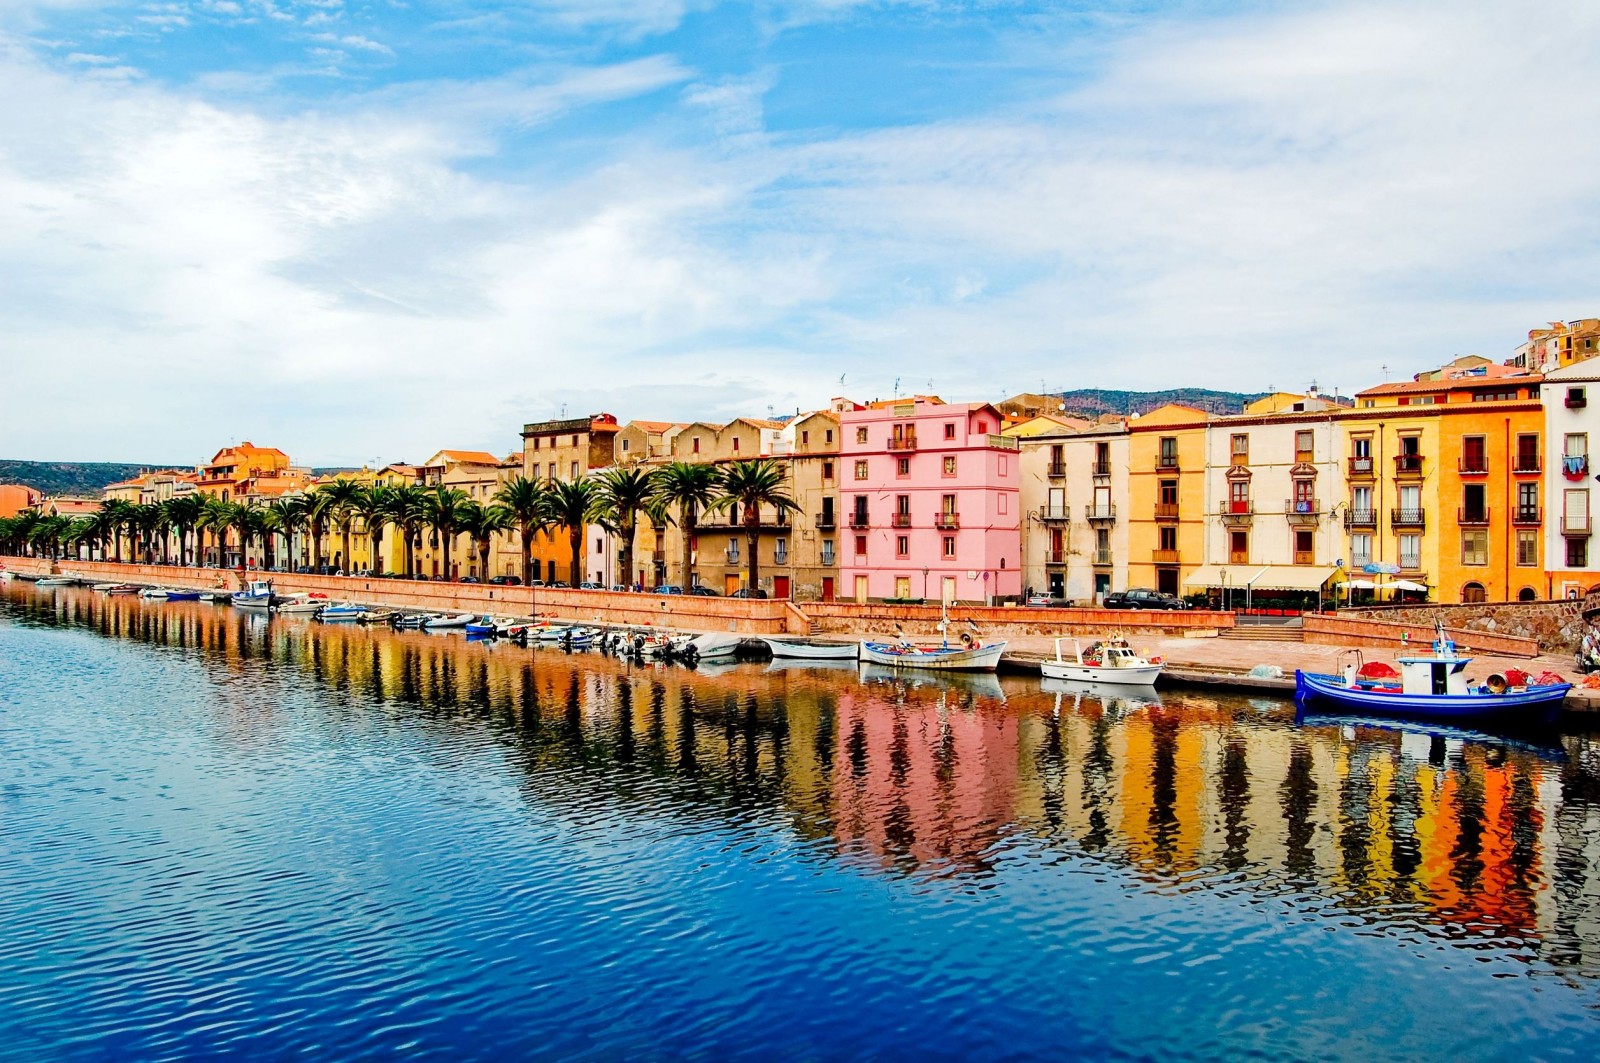 sardinia, man made, town, boat, canal, colors, house, italy, towns